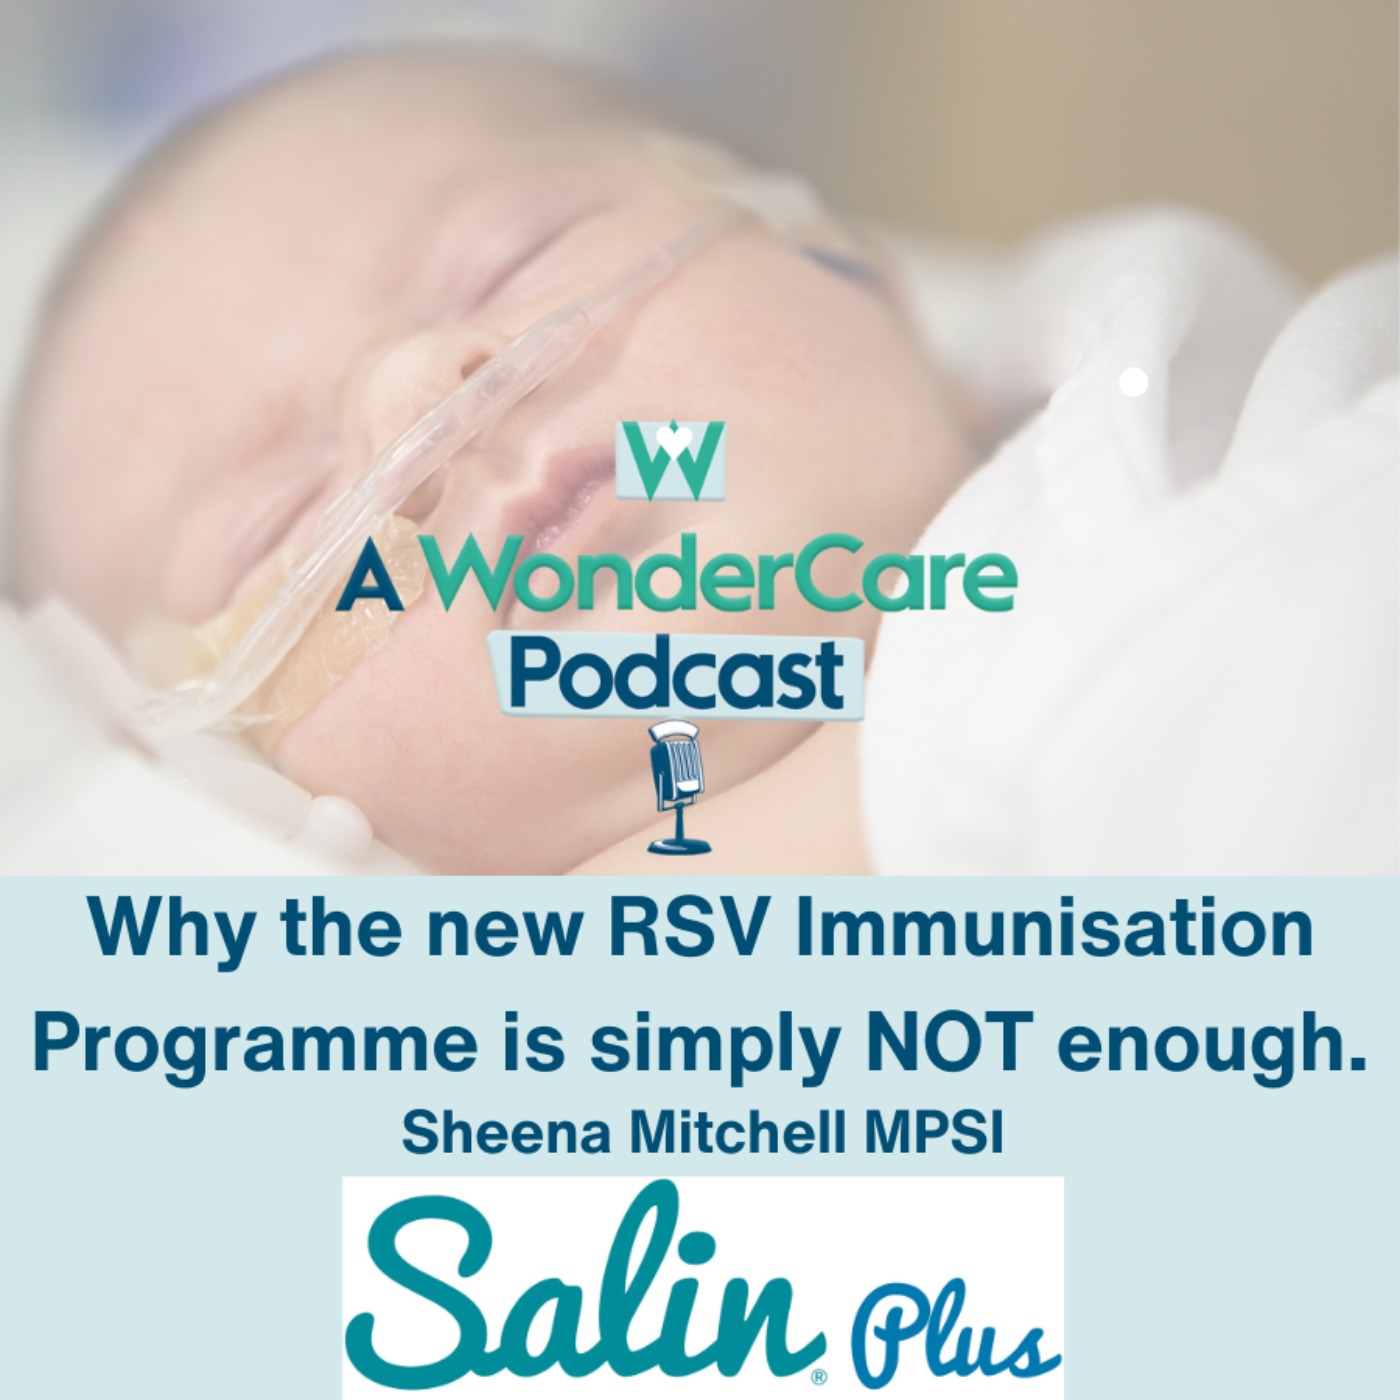 Why the new RSV Immunisation Programme is simply NOT enough.